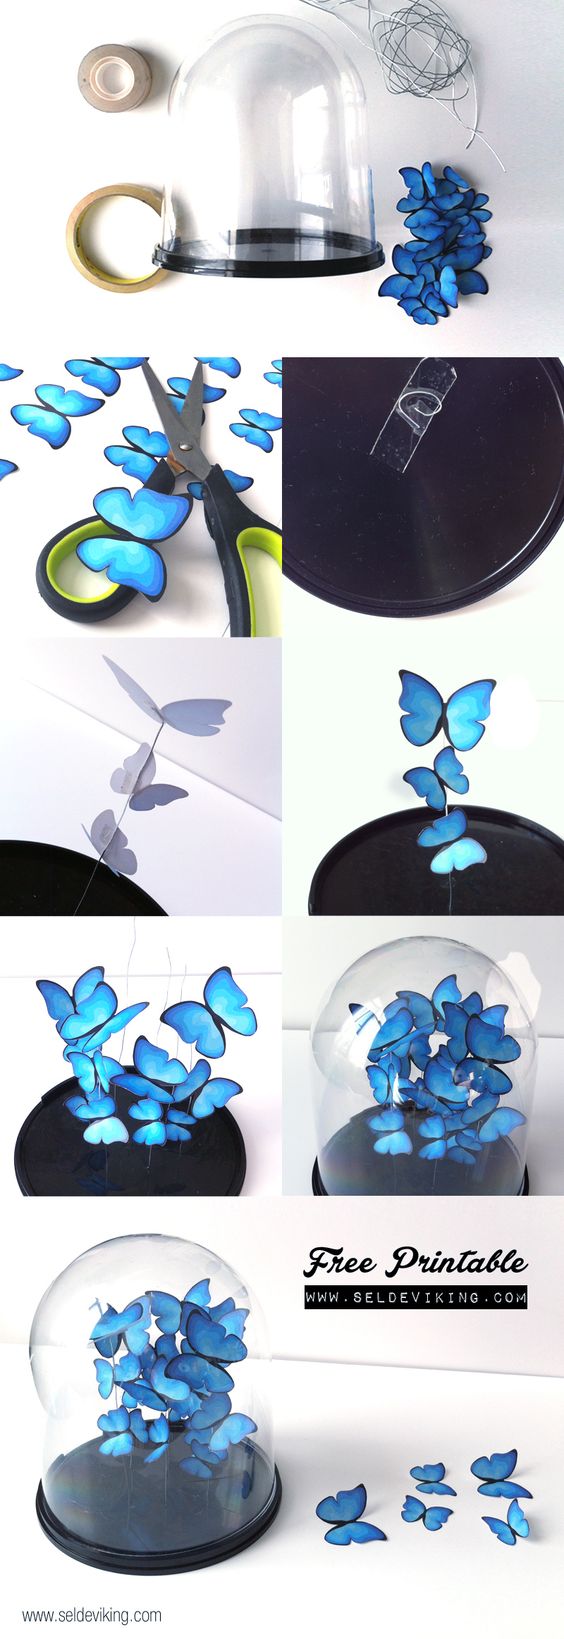 Cool Turquoise Room Decor Ideas - DIY Butterfly Decor - Fun Aqua Decorating Looks and Color for Teen Bedroom, Bathroom, Accent Walls and Home Decor - Fun Crafts and Wall Art for Your Room 